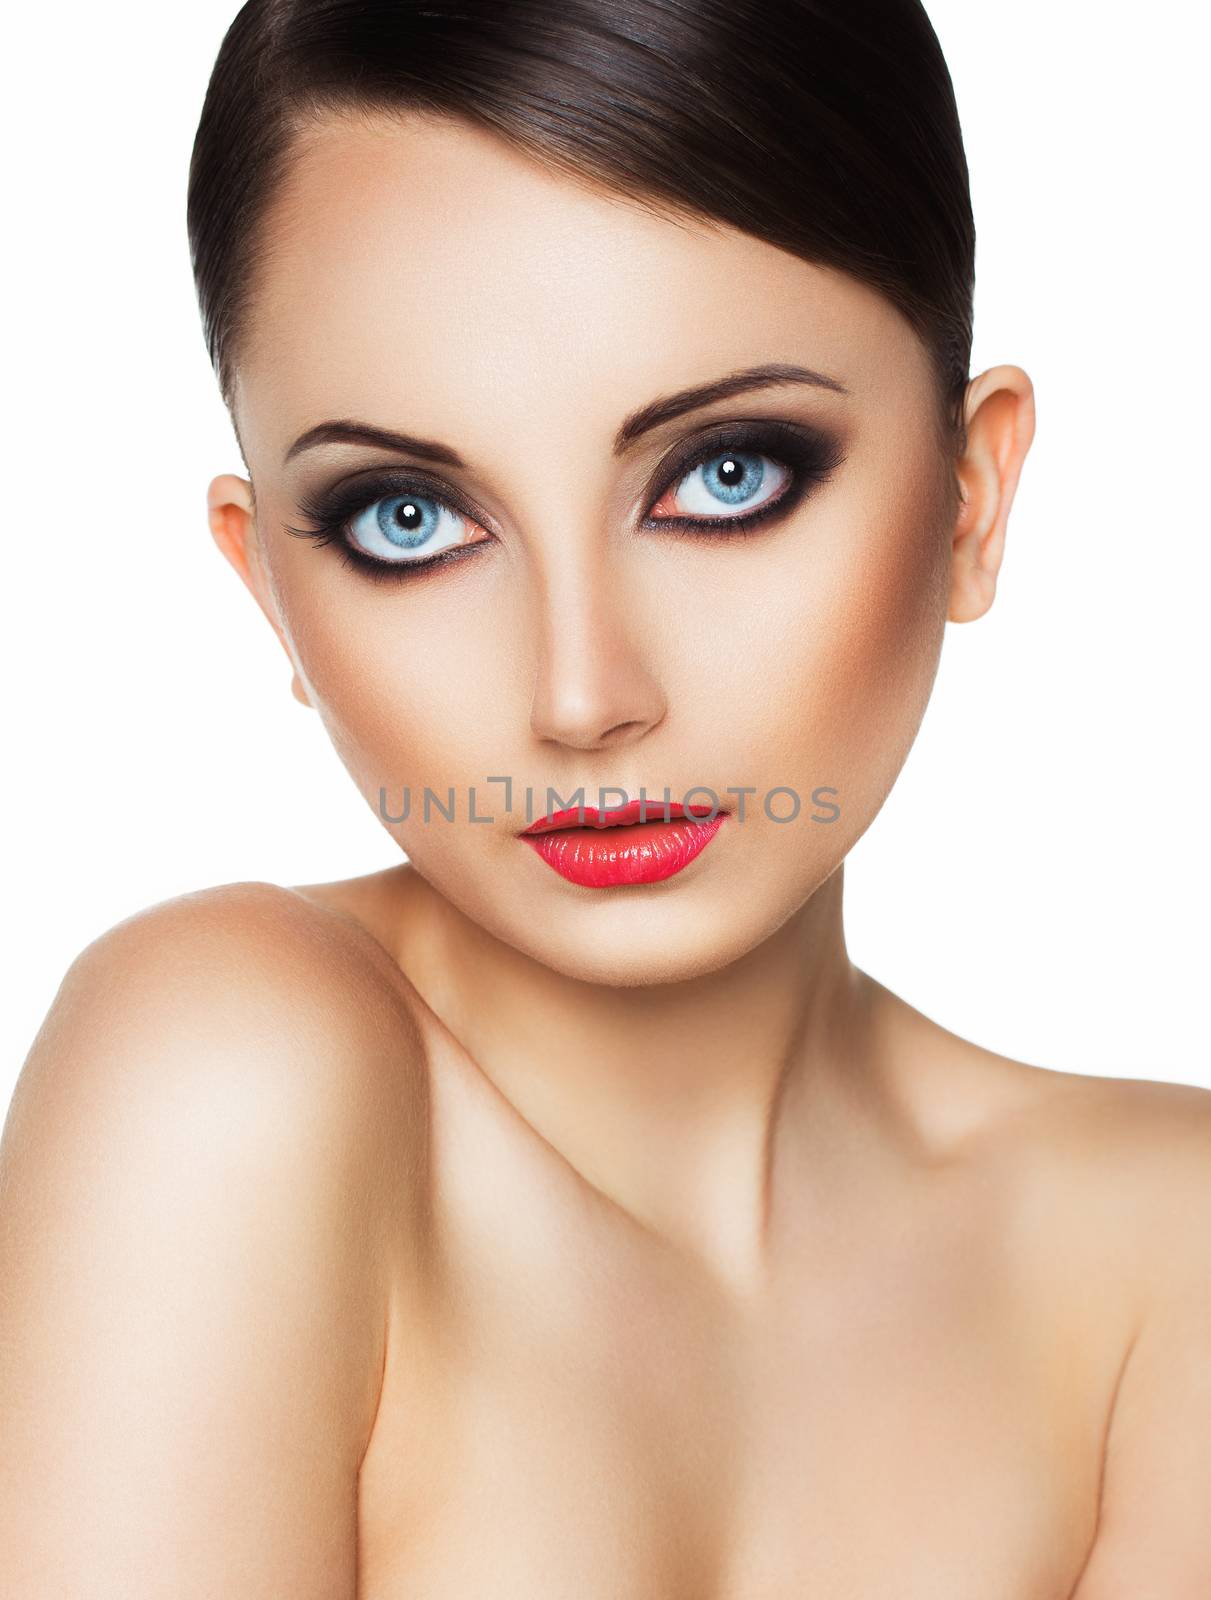 Closeup portrait of a beautiful young woman with a glamorous retro makeup